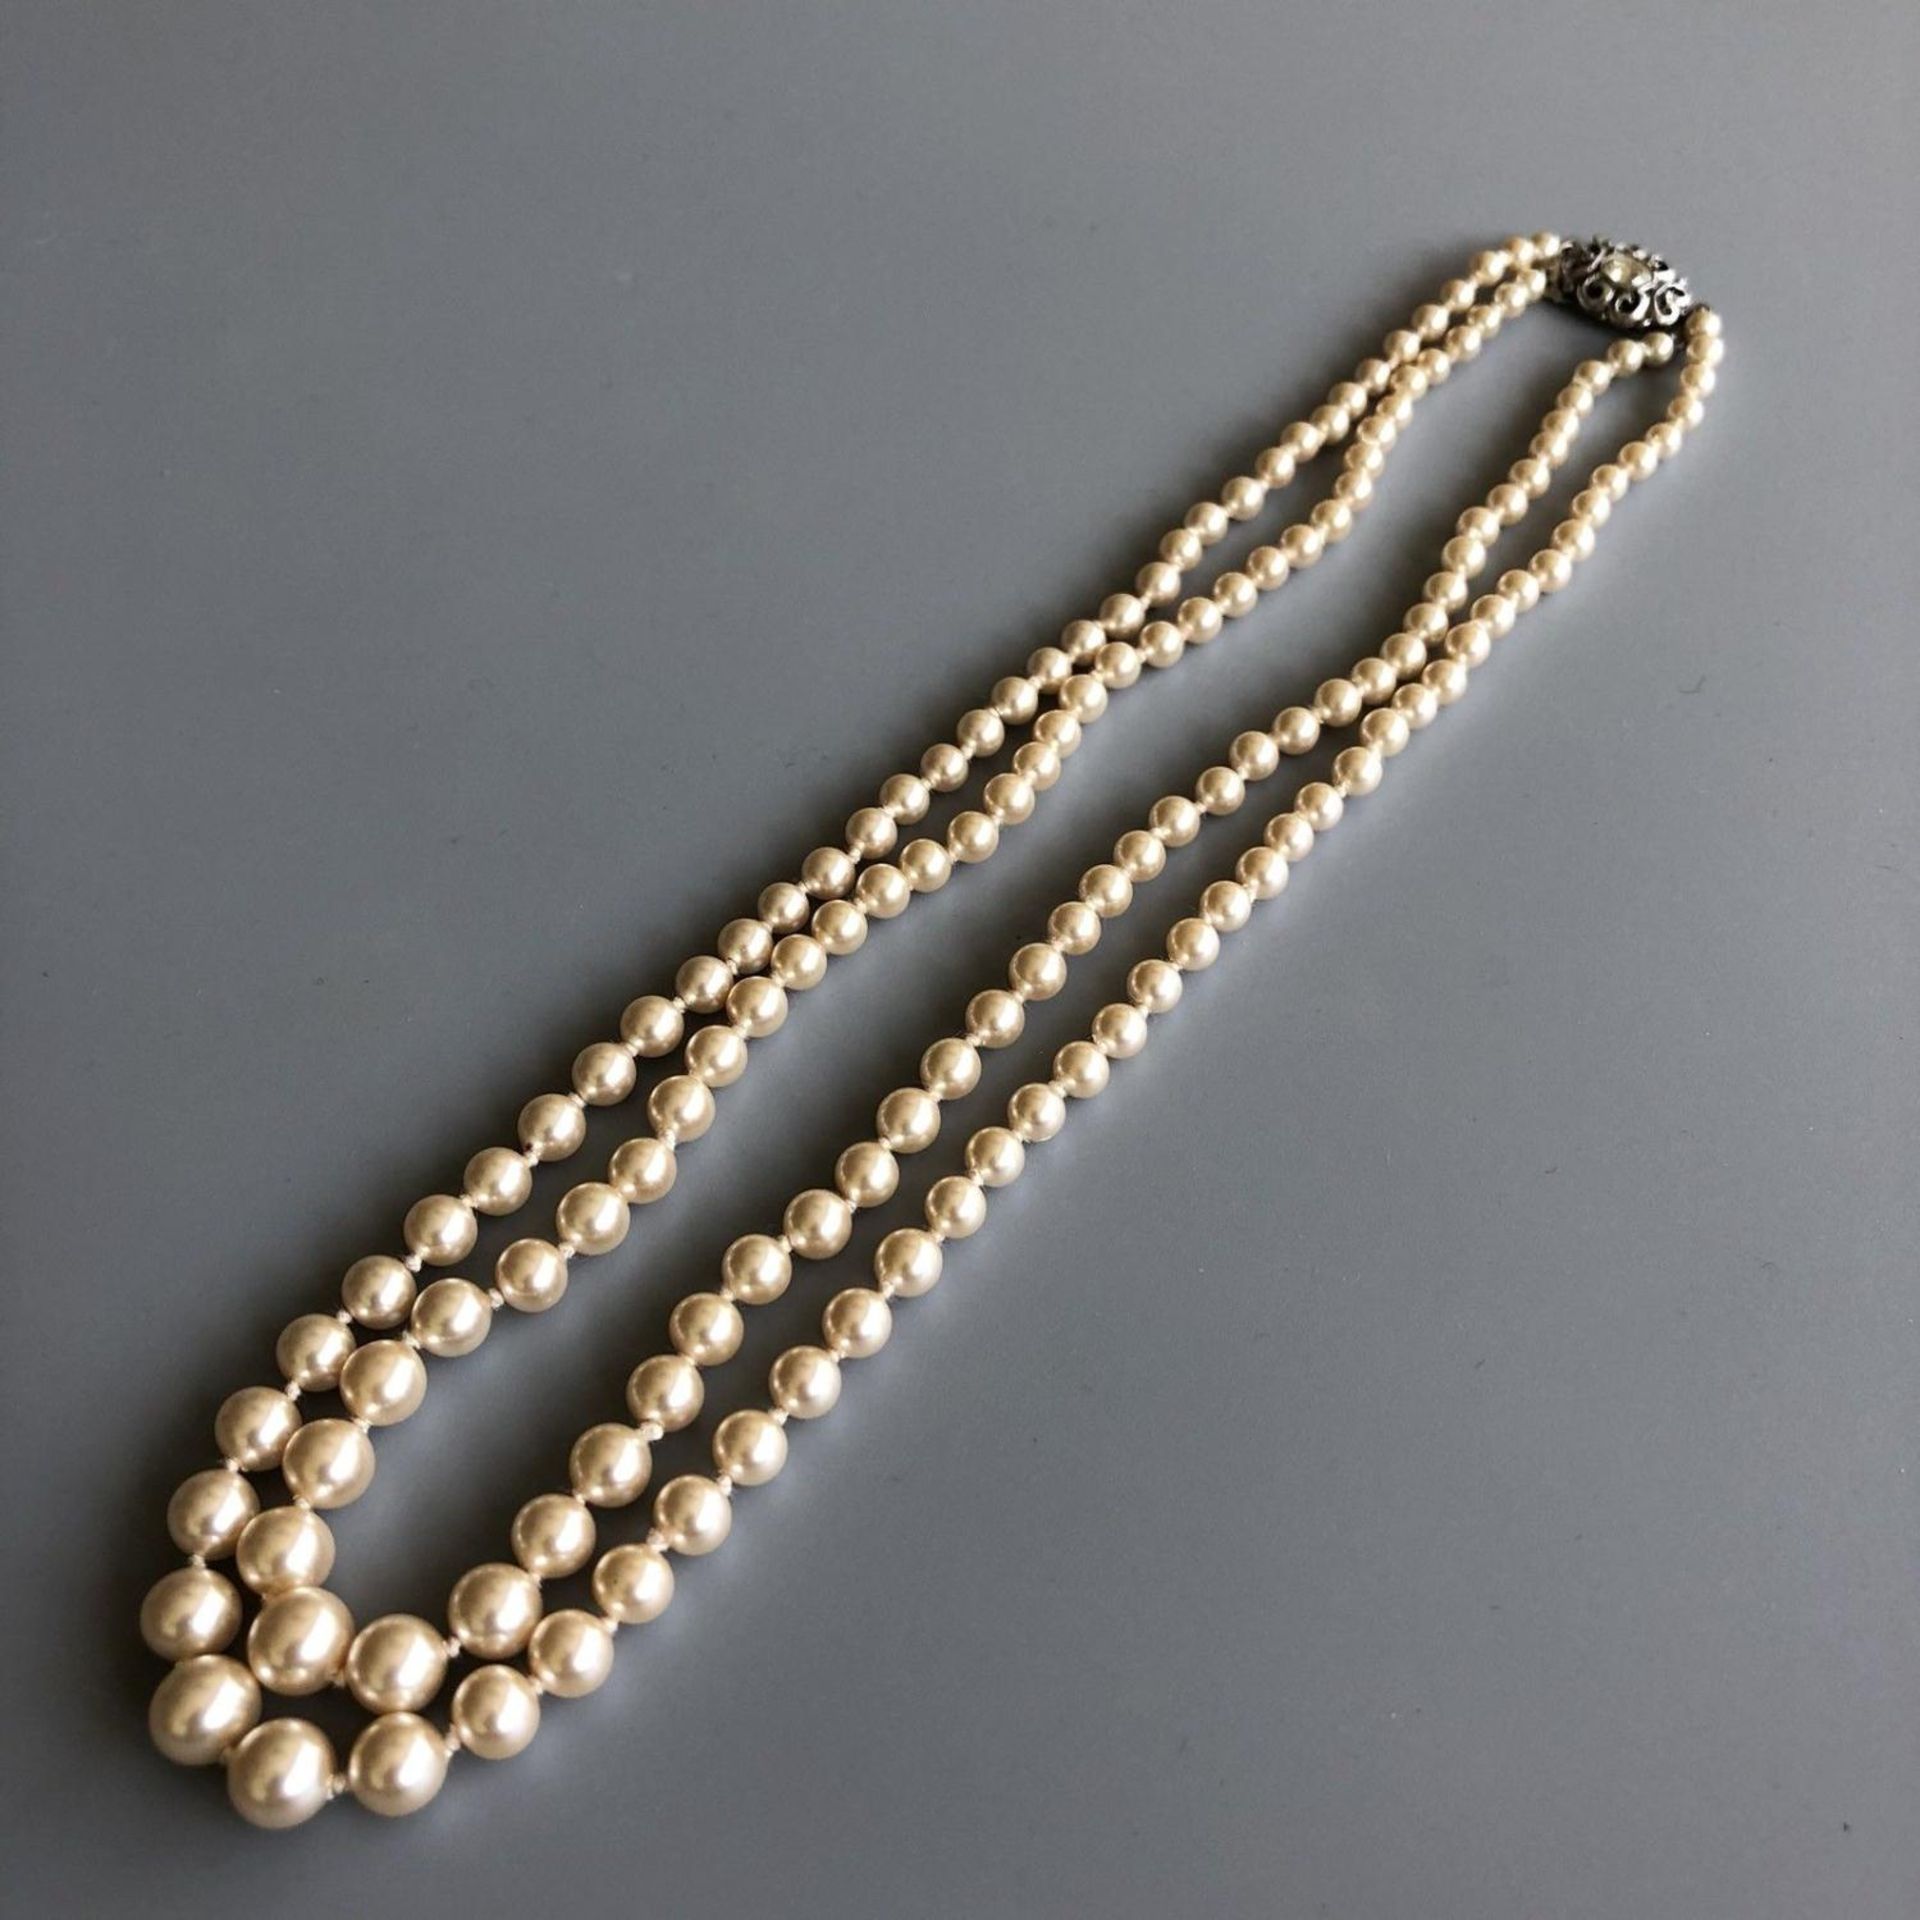 Fine quality vintage faux pearl twin strand 16" necklace with solid SILVER clasp - Image 5 of 5